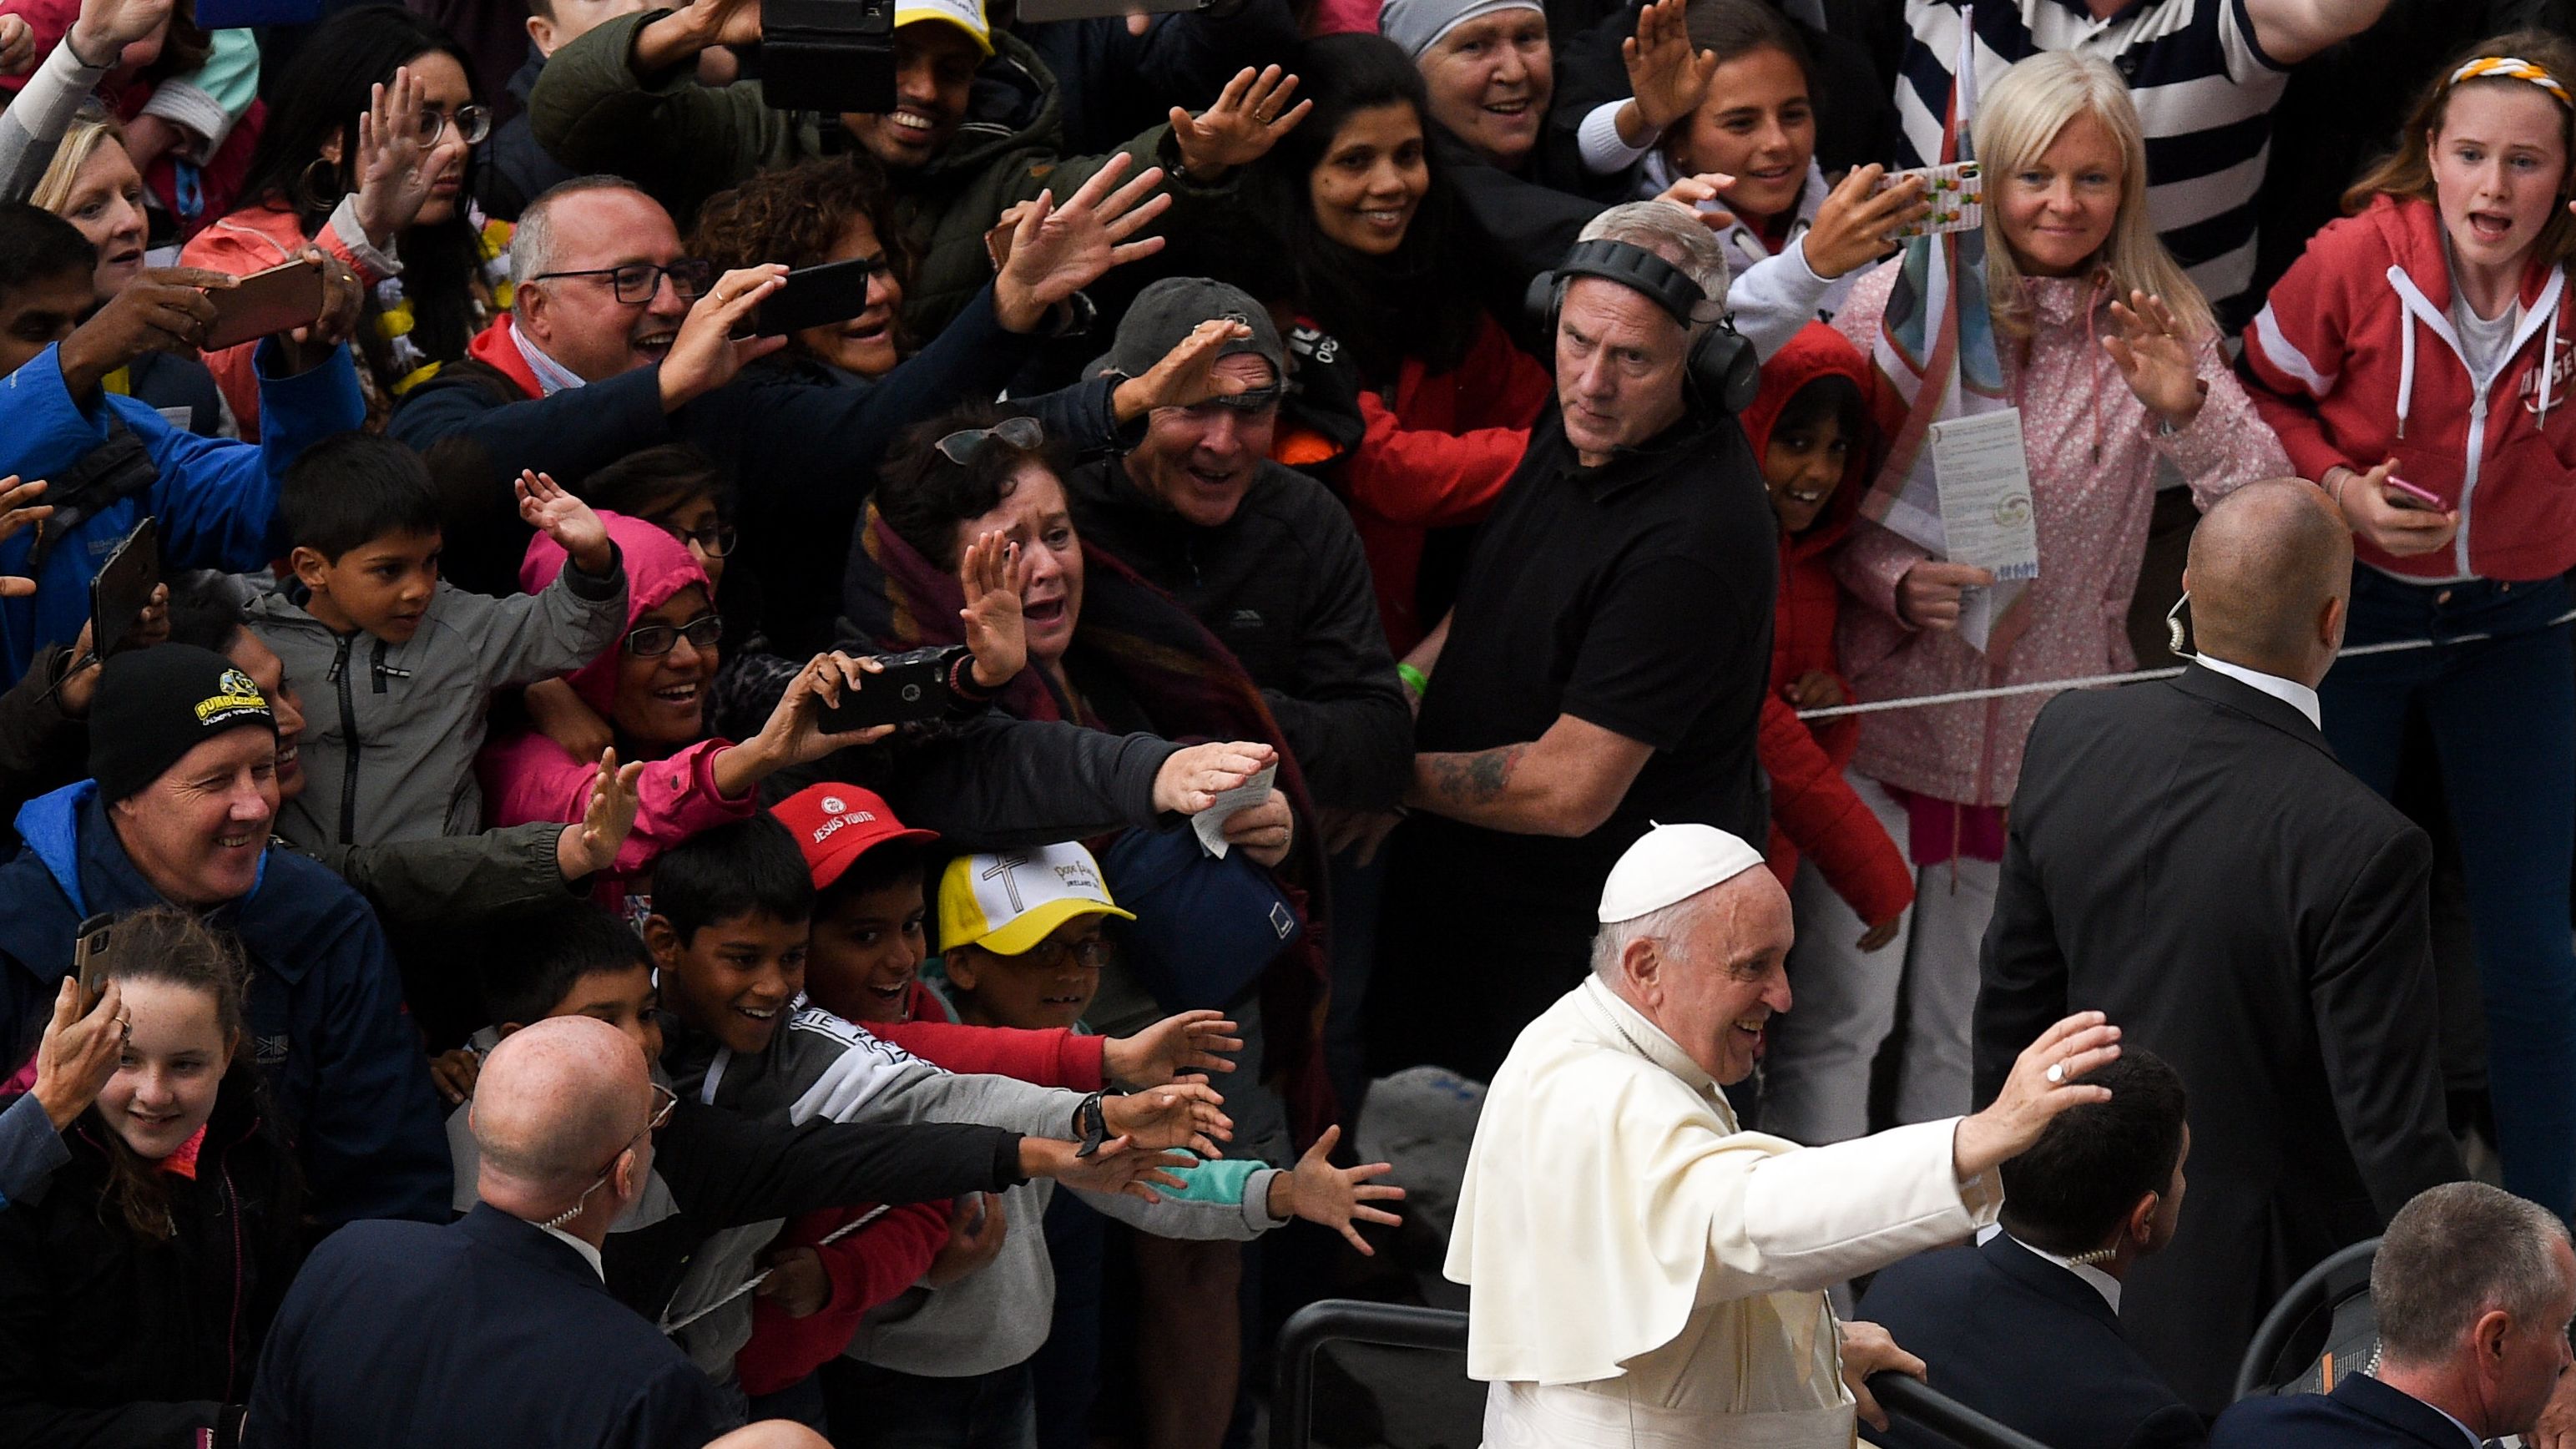 A crowd reacts to Pope Francis' arrival for the Festival of Families.